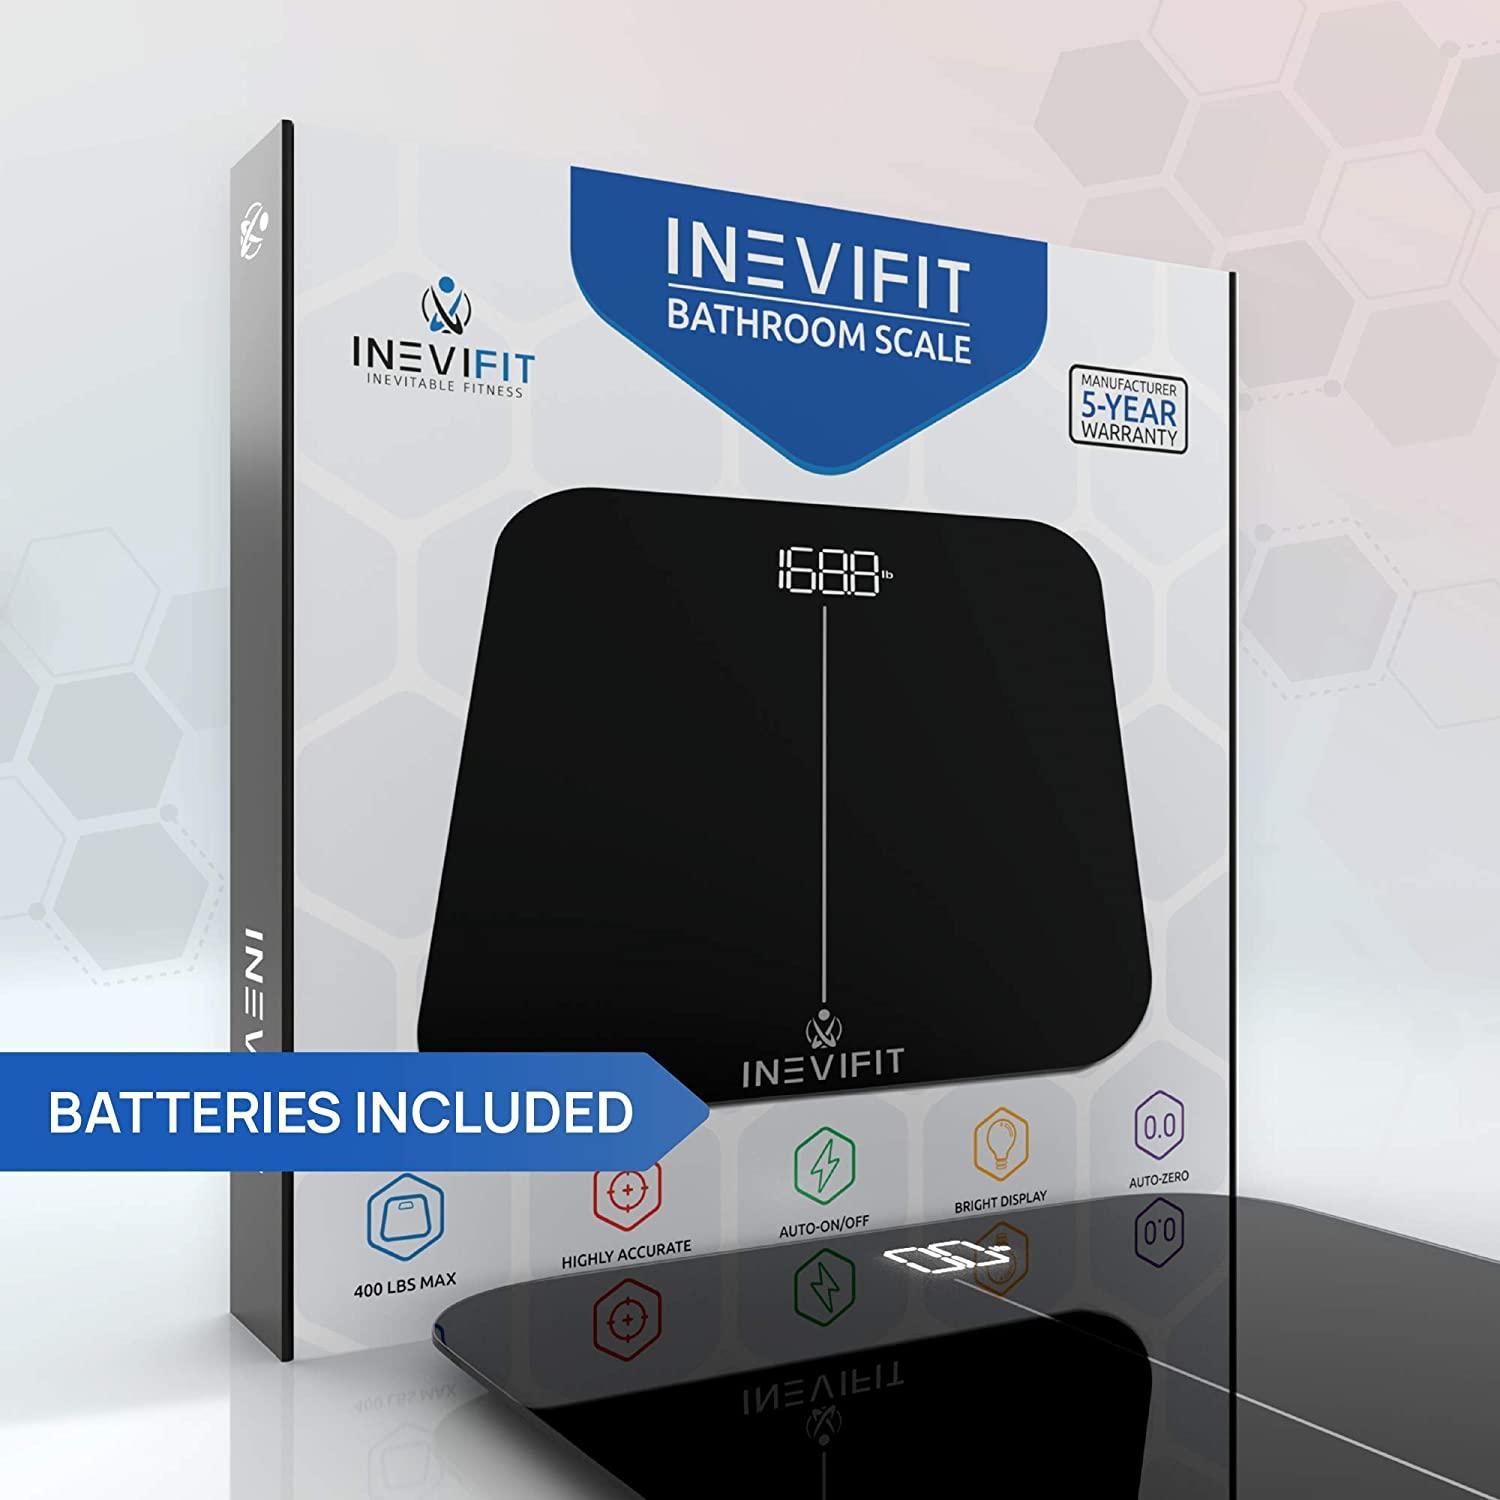 INEVIFIT BATHROOM SCALE, Highly Accurate • Price »